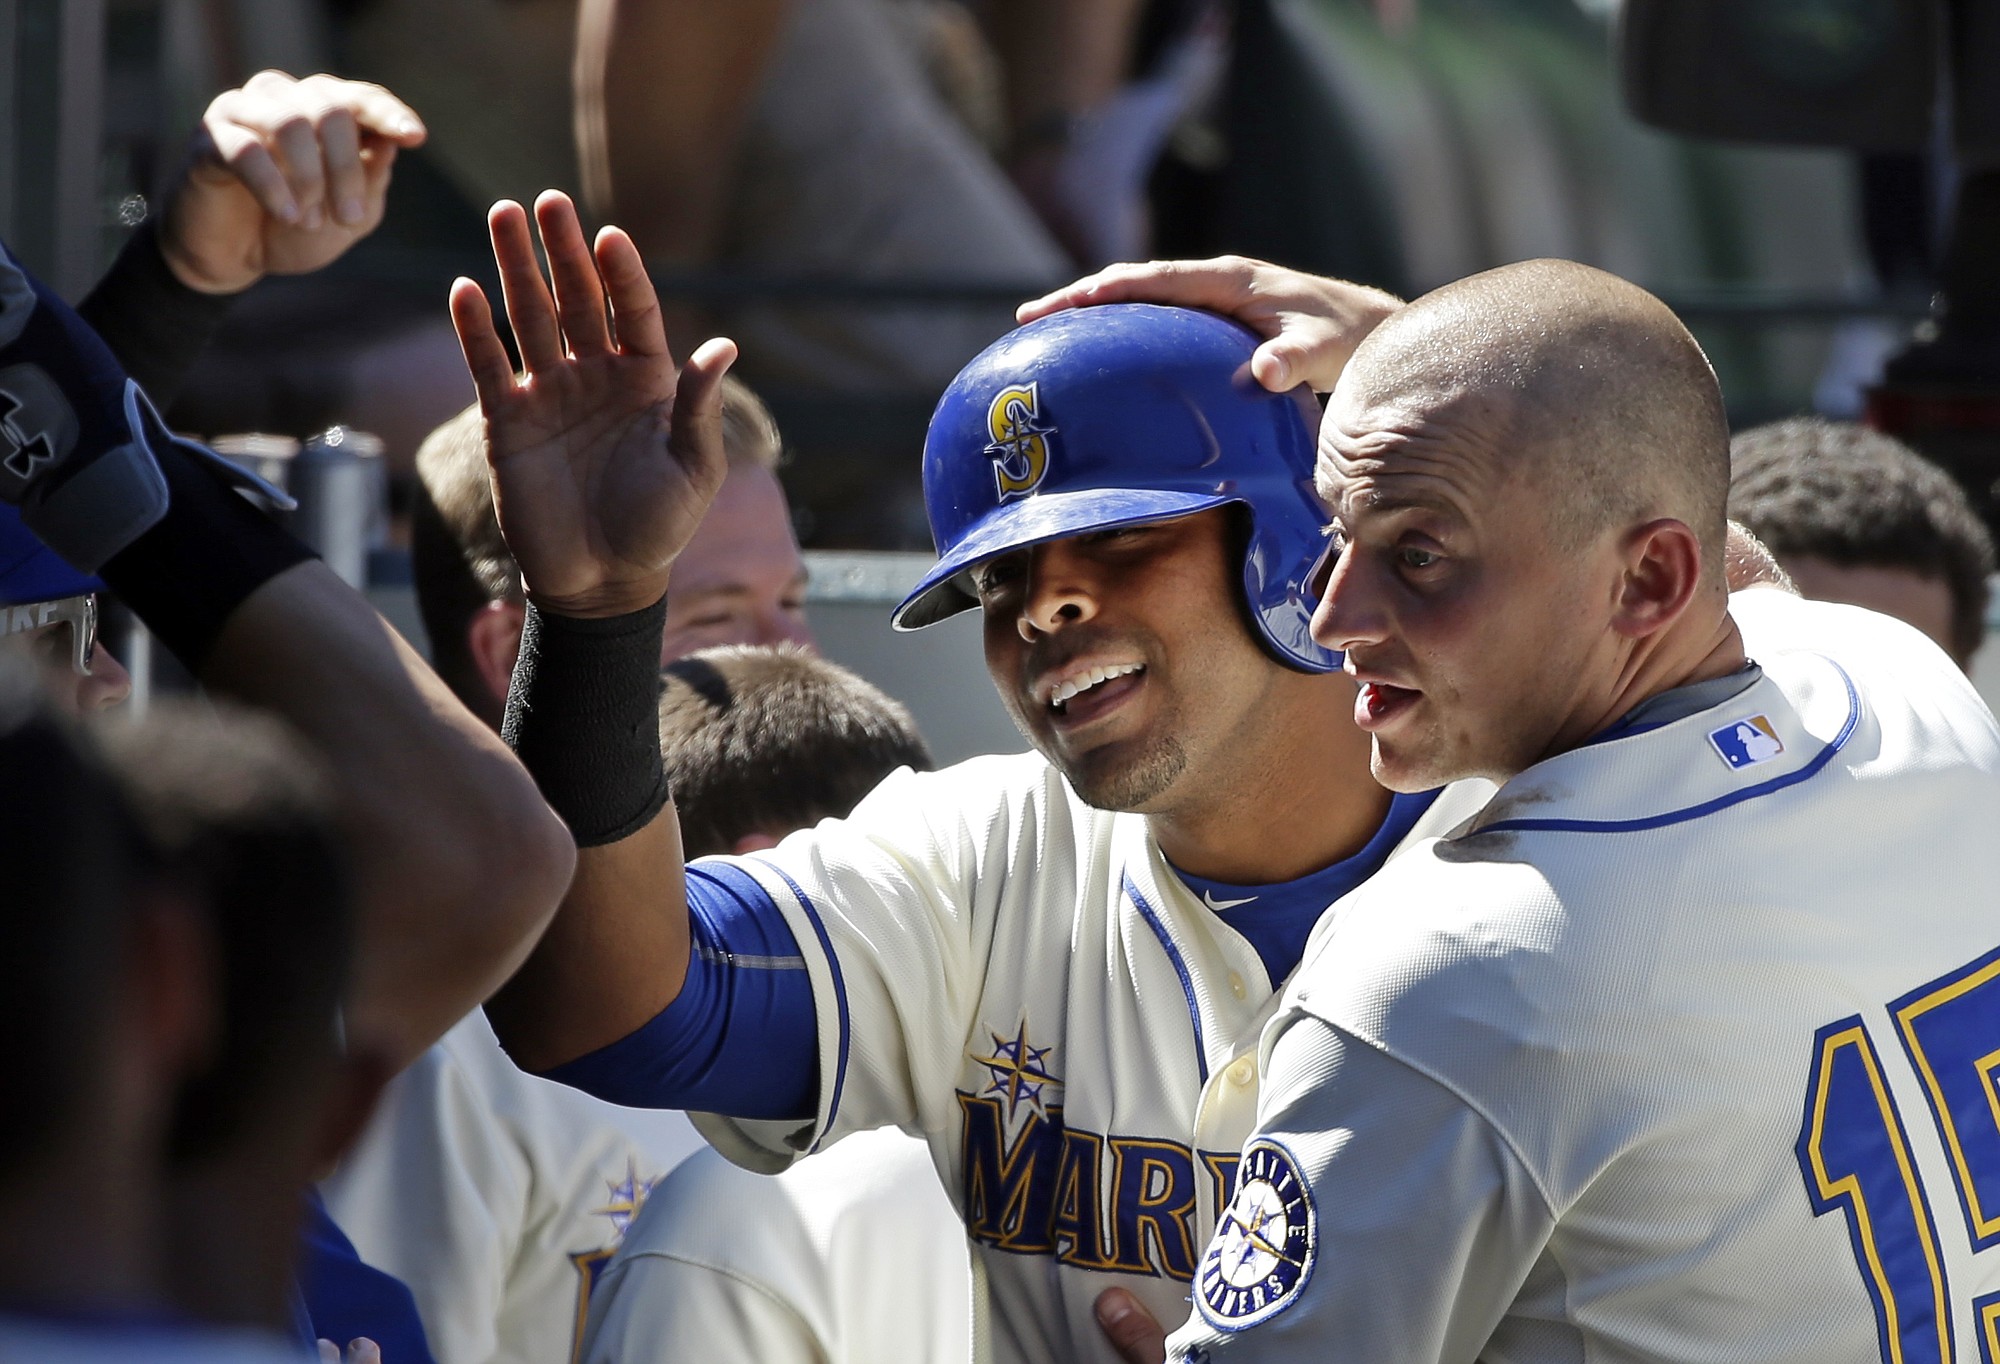 Seattle Mariners' Nelson Cruz, center, is congratulated after his home run by Kyle Seager (15) and teammates against the Texas Rangers in the sixth inning Sunday, Aug. 9, 2015, in Seattle. The Mariners won 4-2.